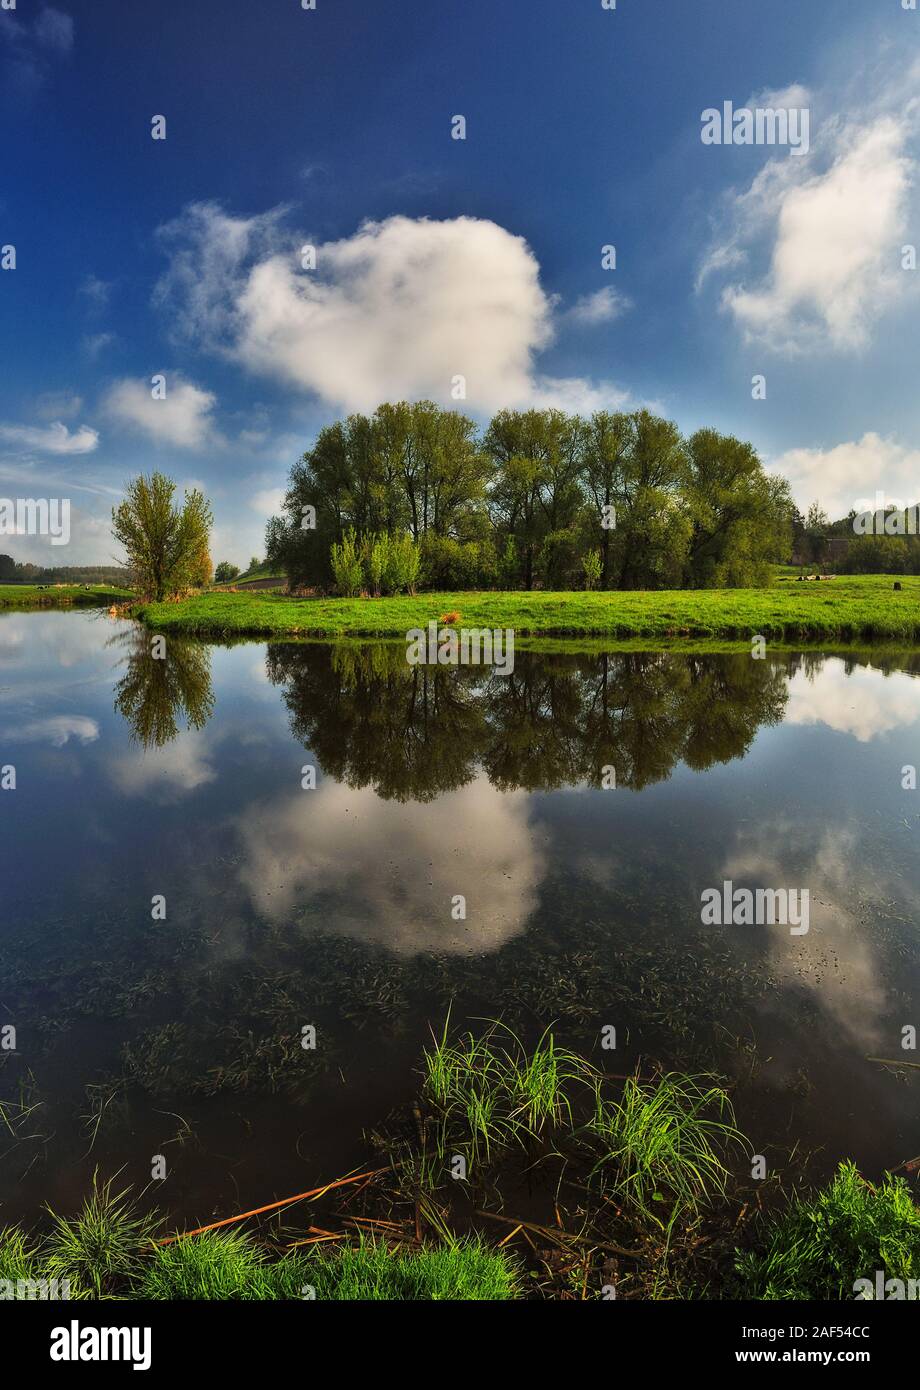 spring landscape in the river valley. dawn in a picturesque place Stock Photo